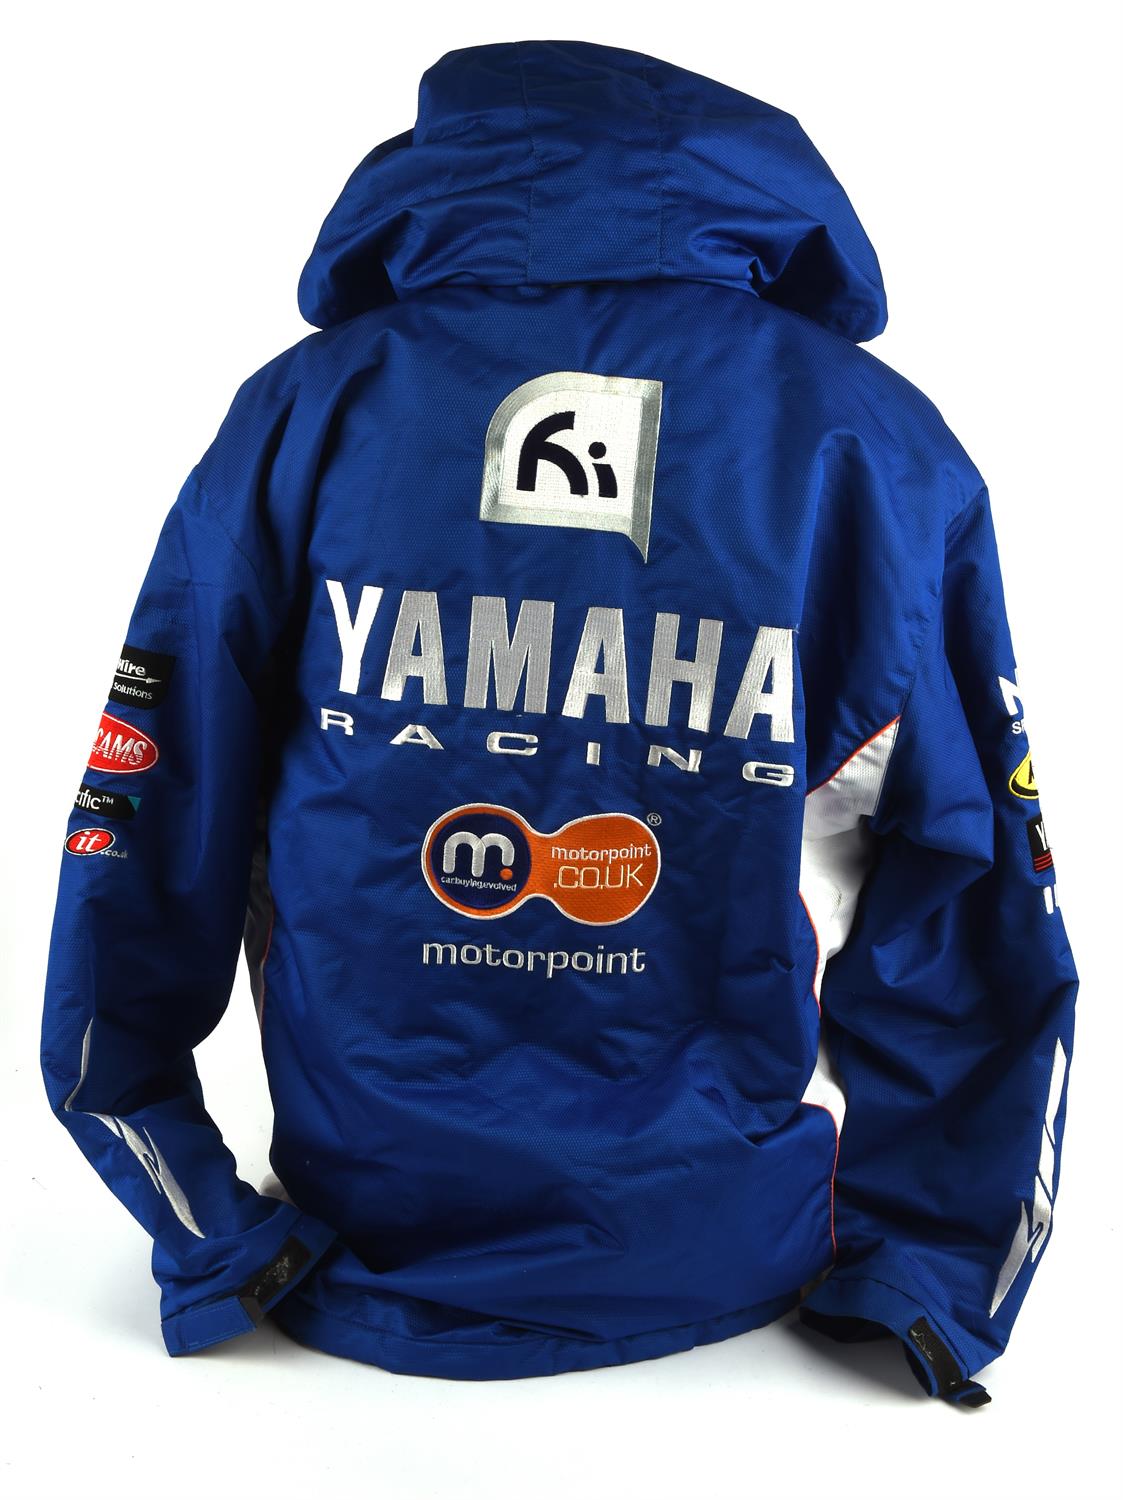 Yamaha Official Rob Mac Racing Jacket (XXL) and Two Bike Crash Helmets for display only, size M58. - Image 2 of 4